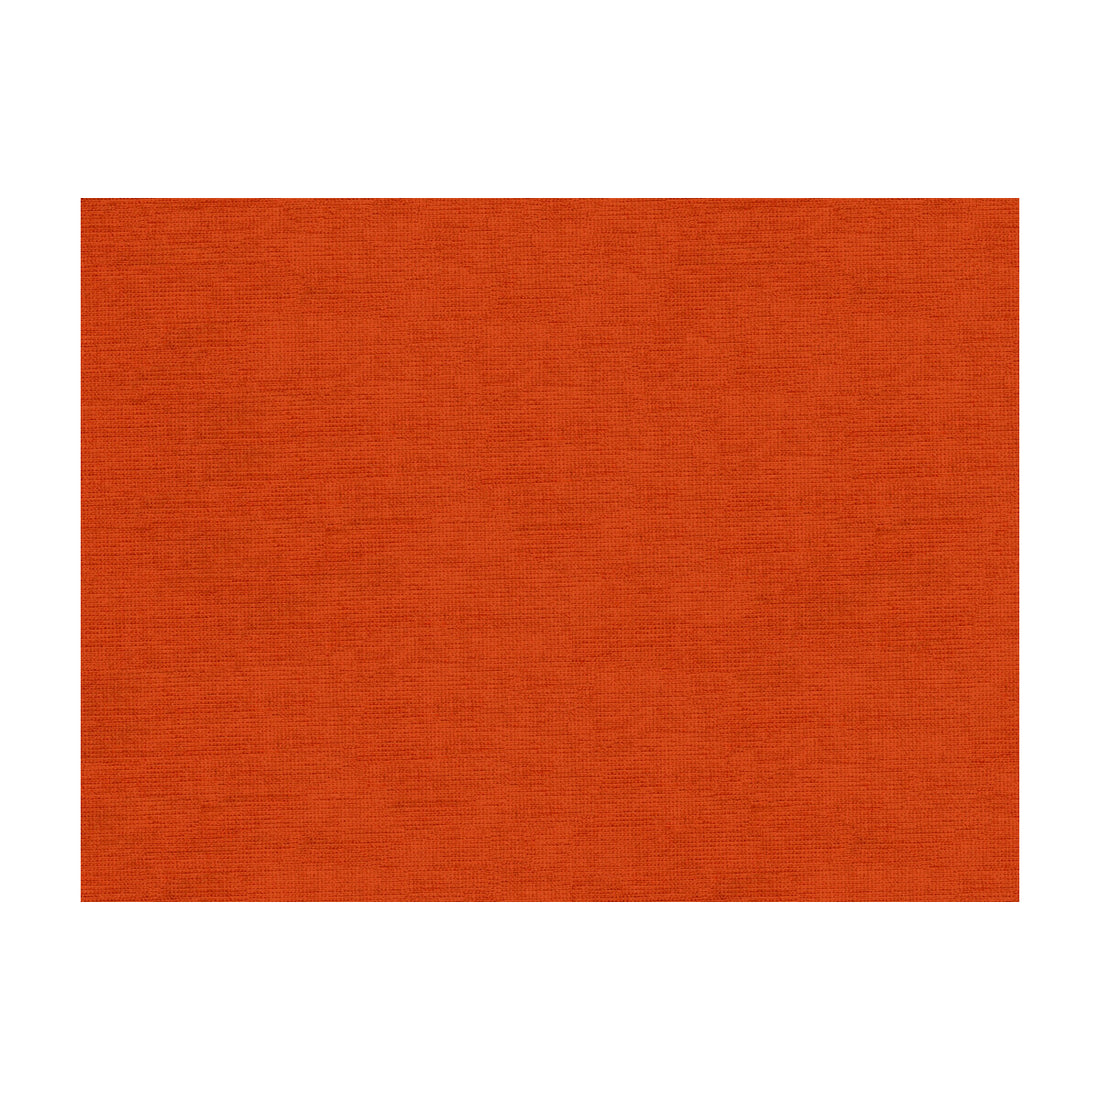 Charmant Velvet fabric in persimmon color - pattern 8013150.712.0 - by Brunschwig &amp; Fils